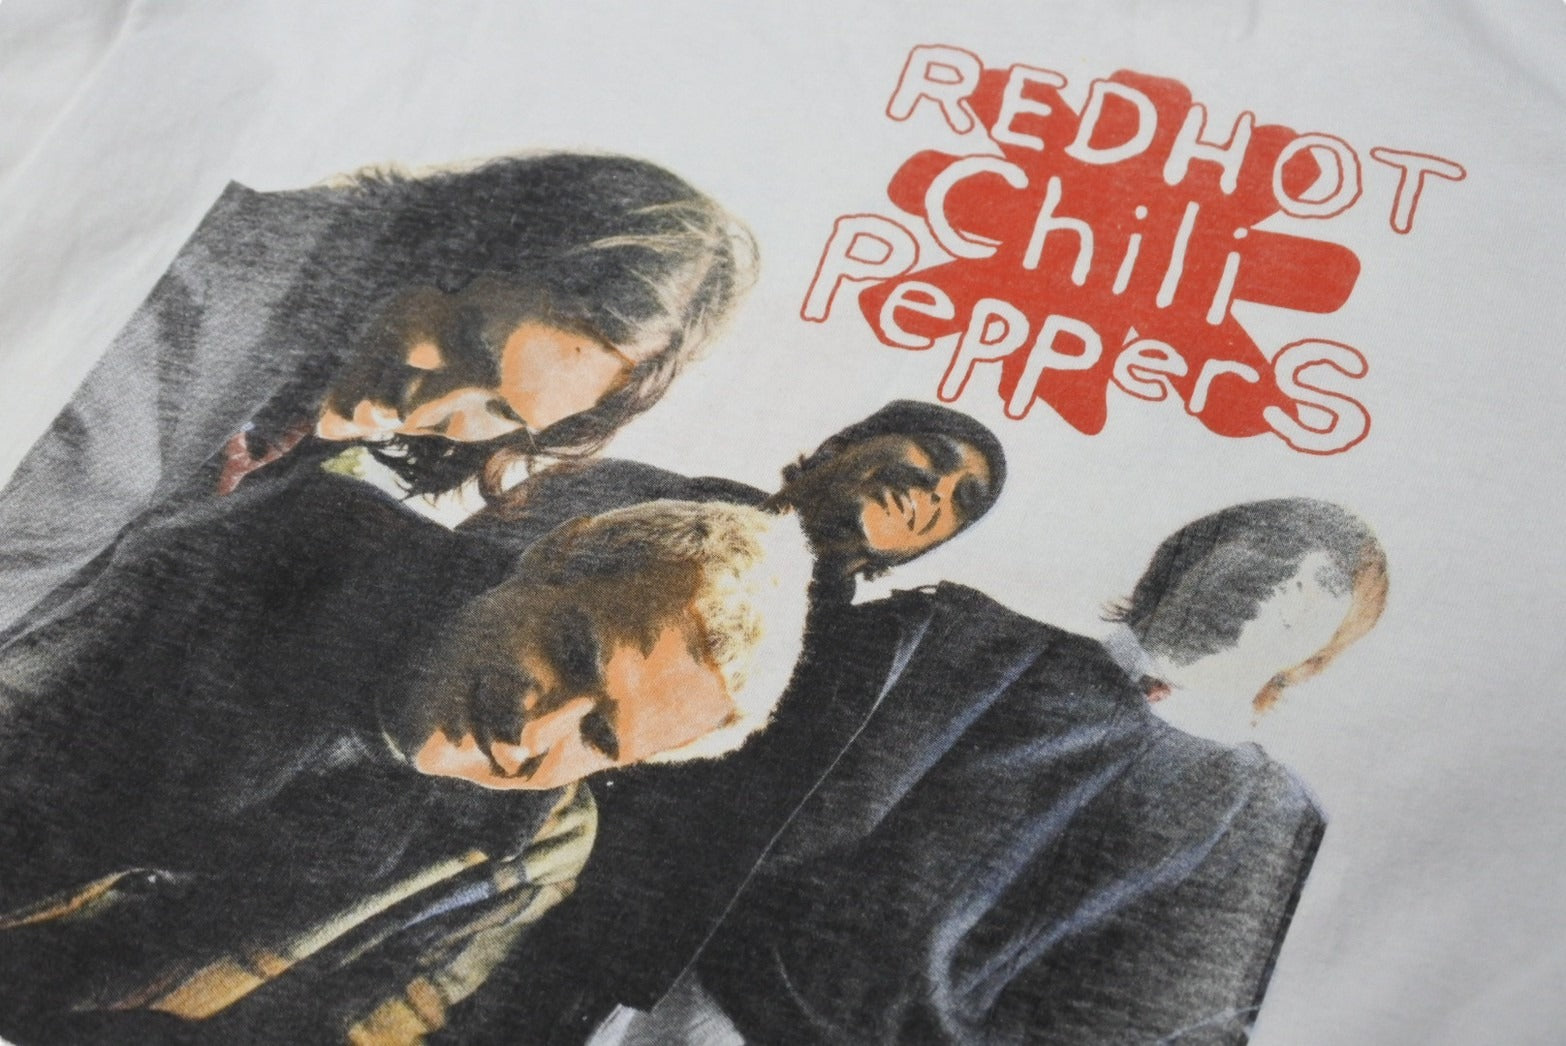 RED HOT CHILIPEPPERS vintage tee レッチリ ヴィンテージT レッド